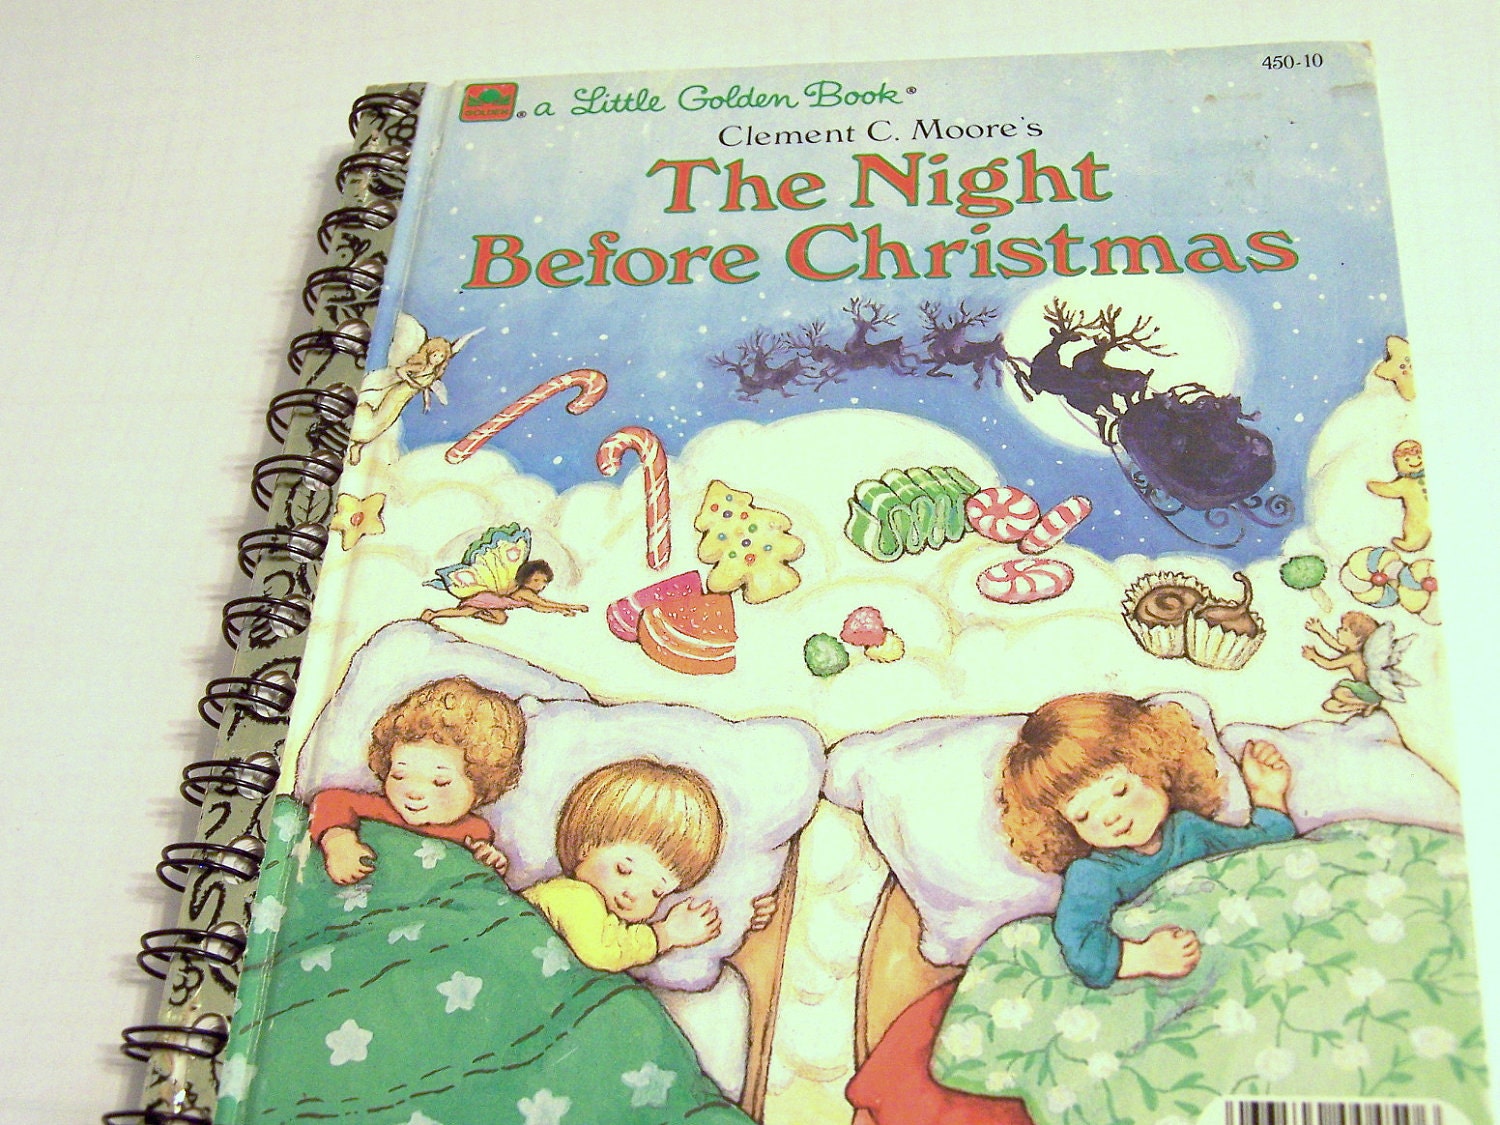 Upcycled Golden Book Notebook Upcycled The Night Before Christmas Notebook Childrens Book:  The Night Before Christmas by Clement C. Moore